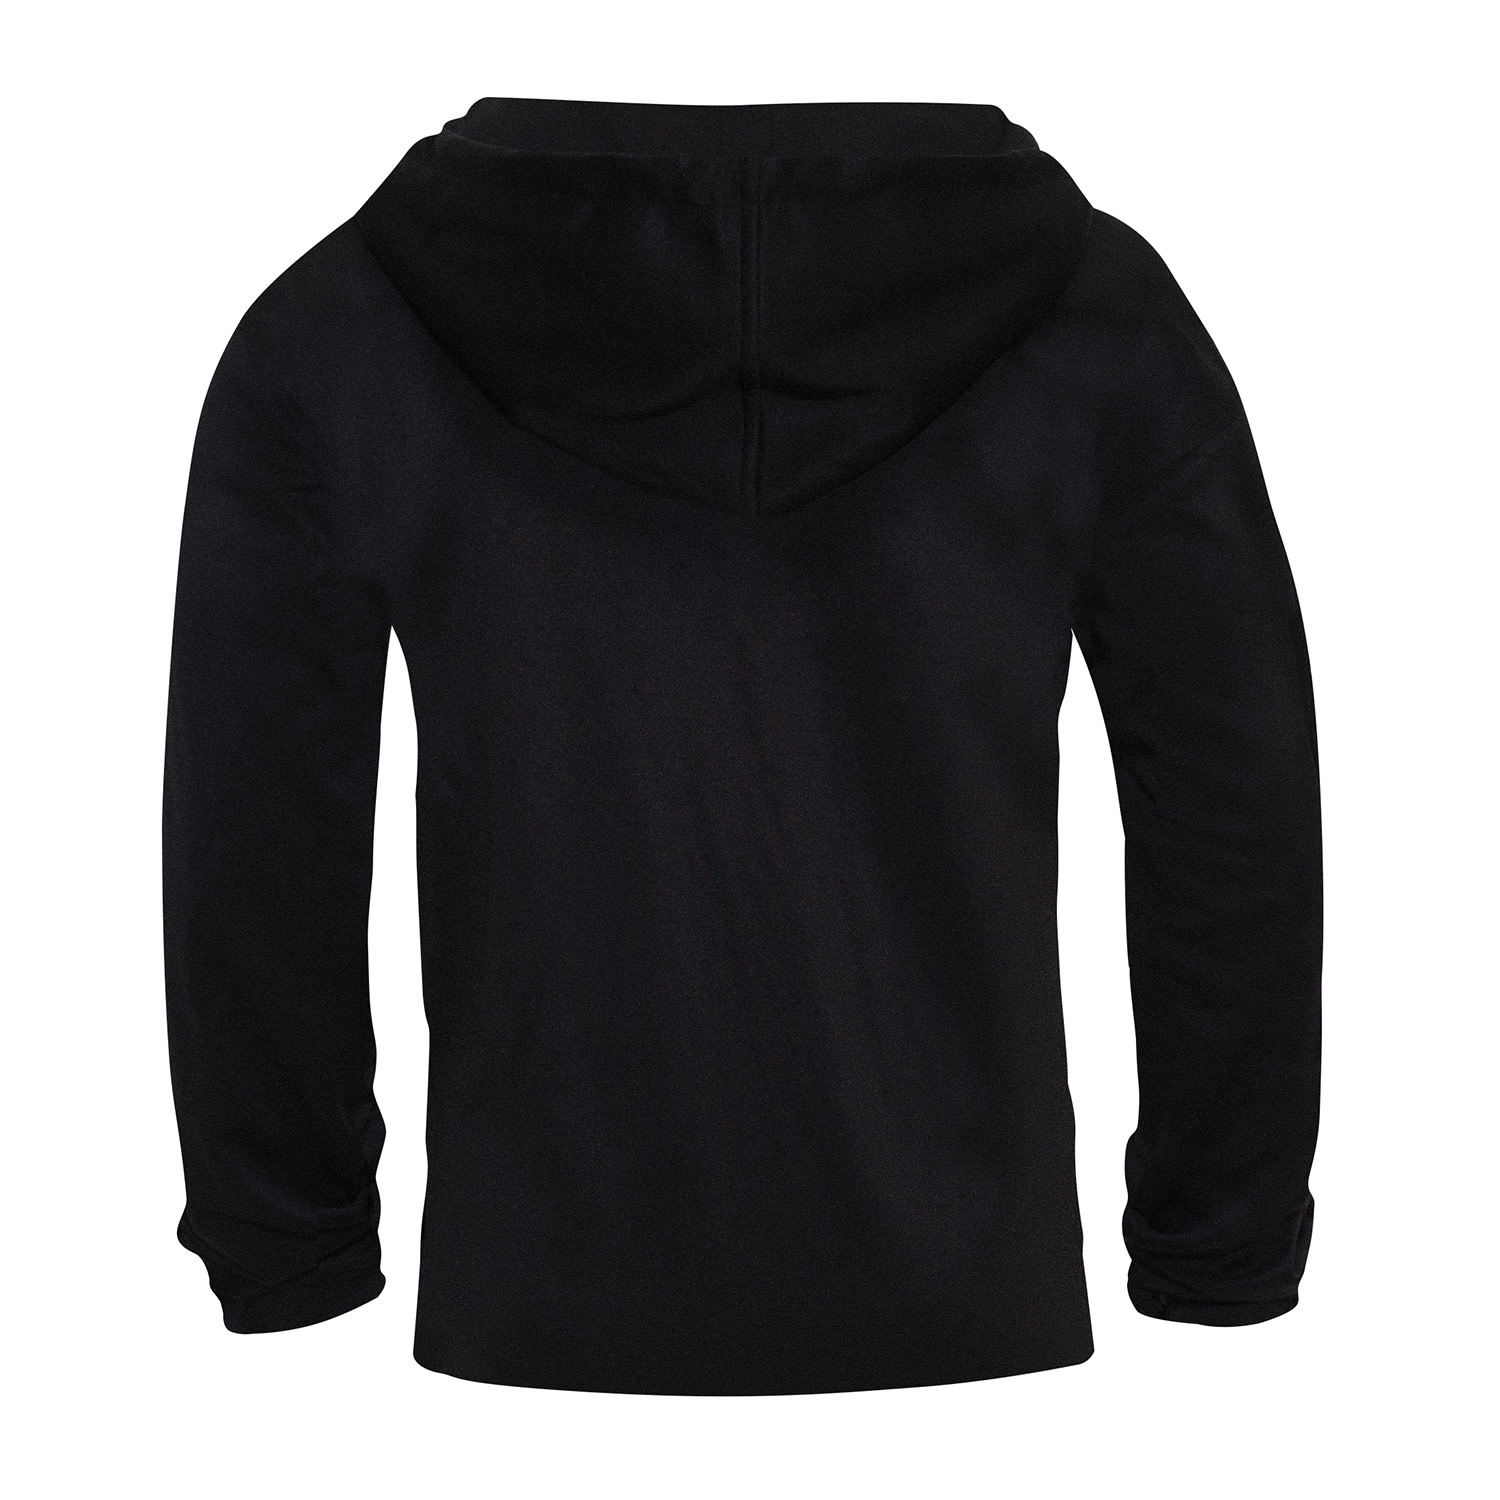 Rothco Concealed Carry Zippered Hoodie